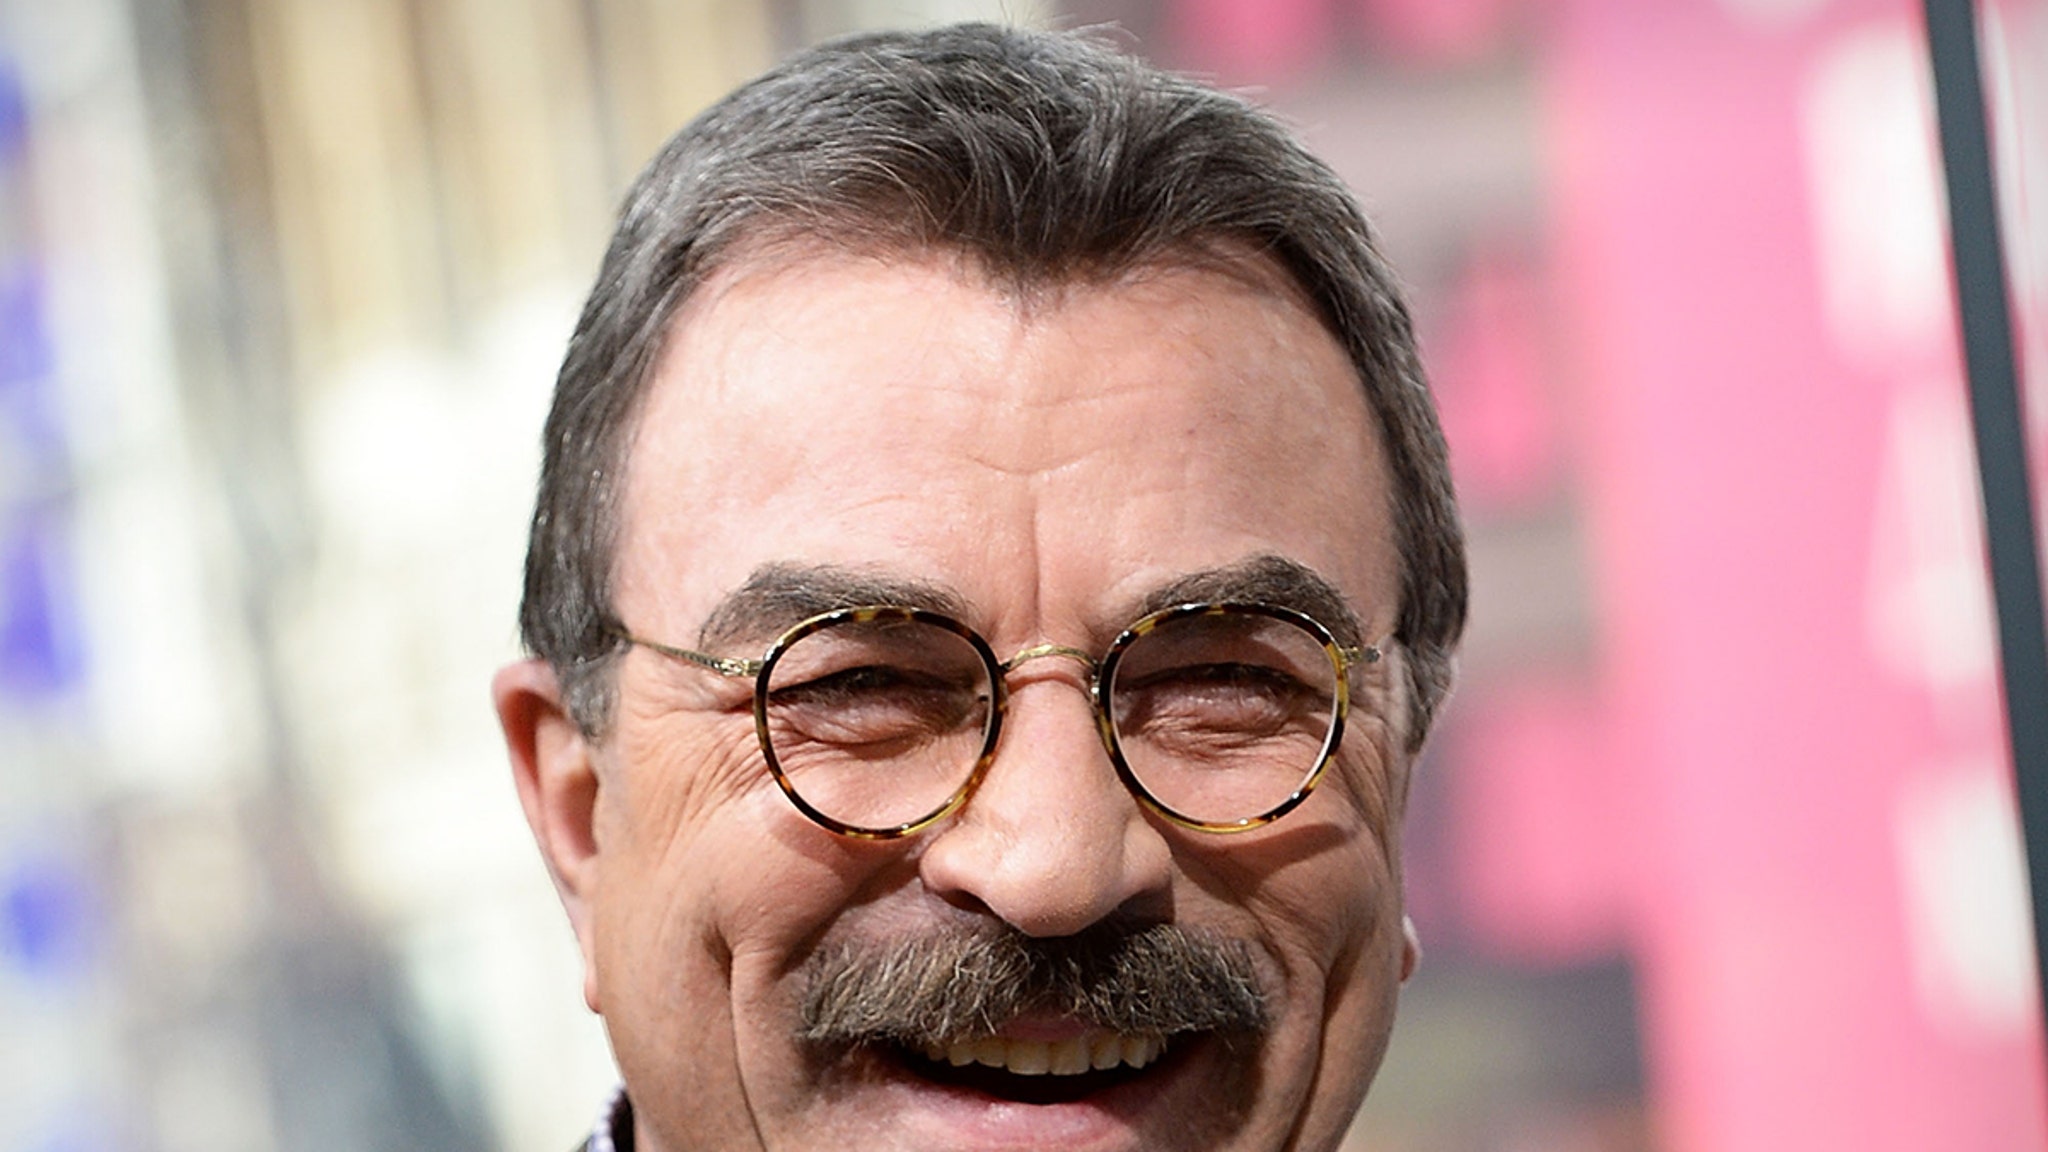 Tom Selleck tips $ 2,020 at the restaurant for the 2020 tip challenge